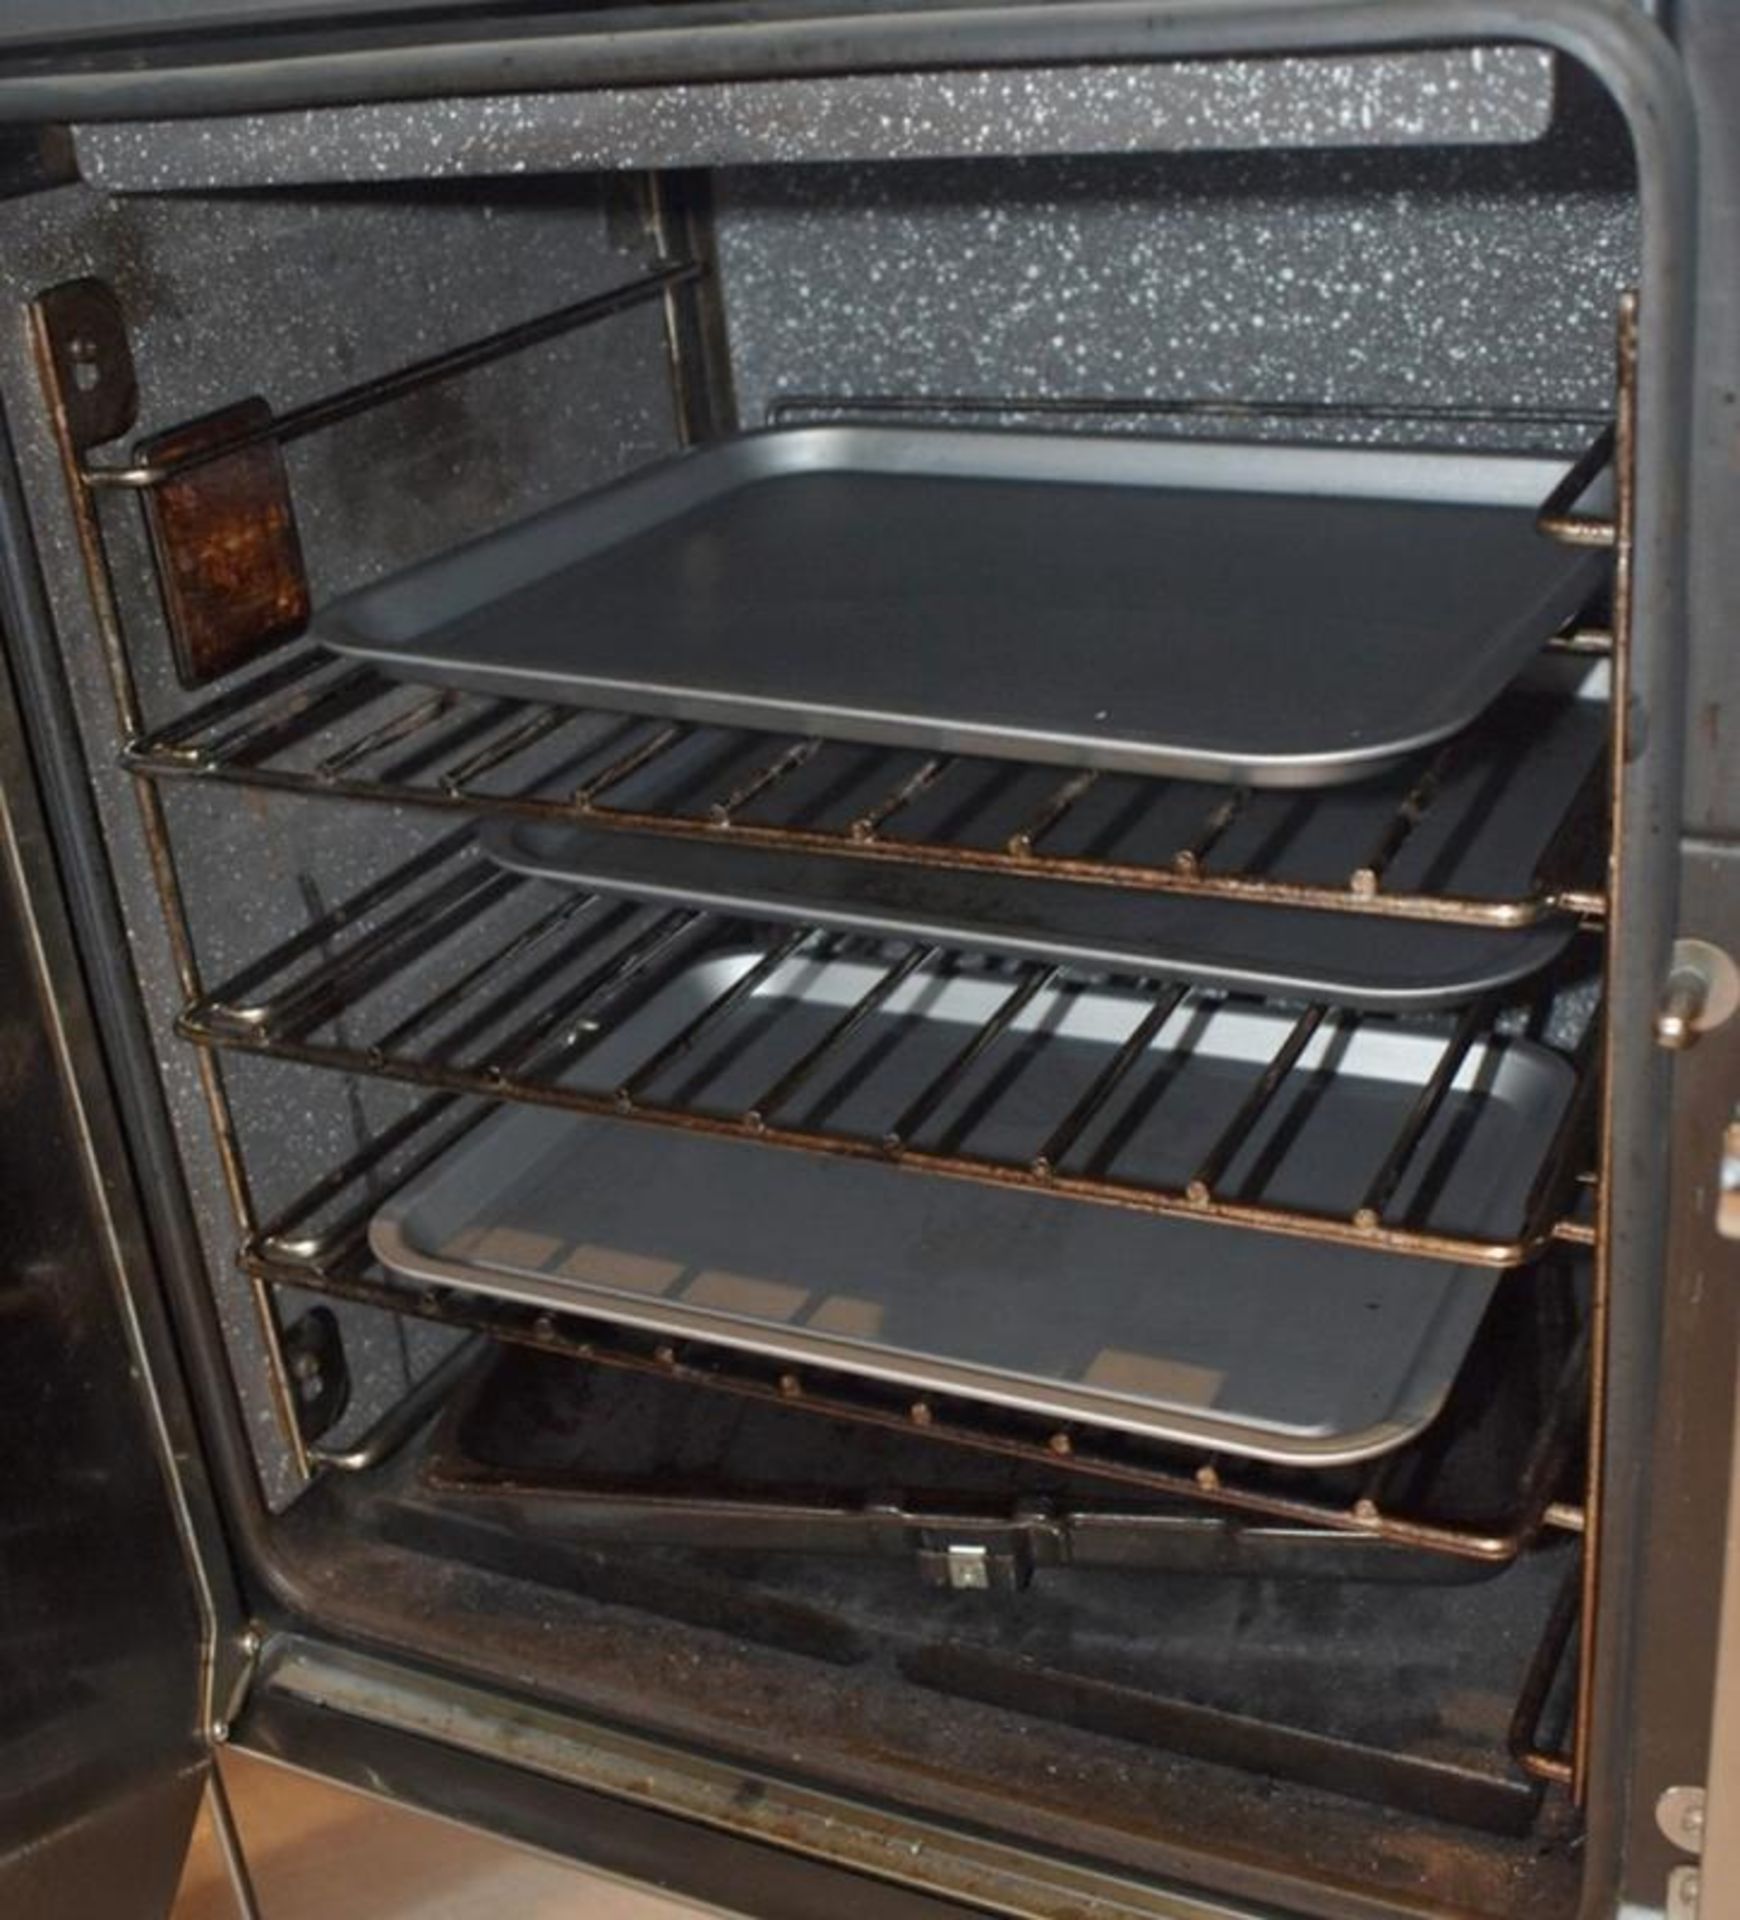 1 x MERCURY Duel Fuel 5-Burner Range Cooker In Stainless Steel - Dimensions (approx): W109 x D65 x H - Image 10 of 10